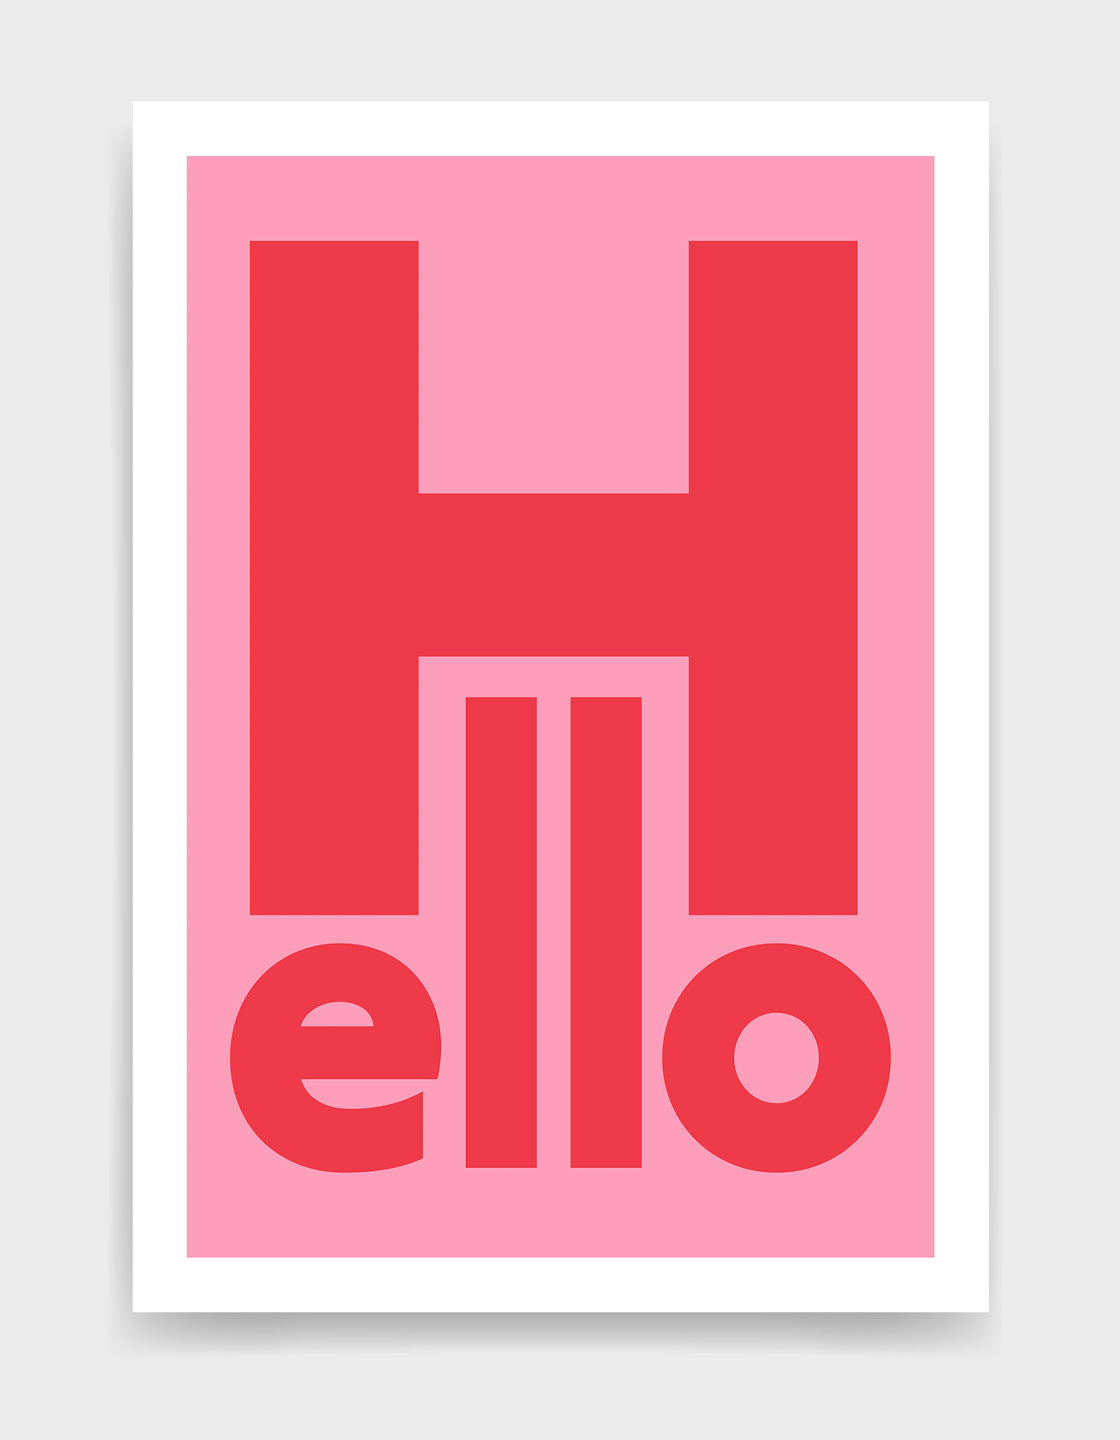 typography print with the word hello in red bold type against a pink background